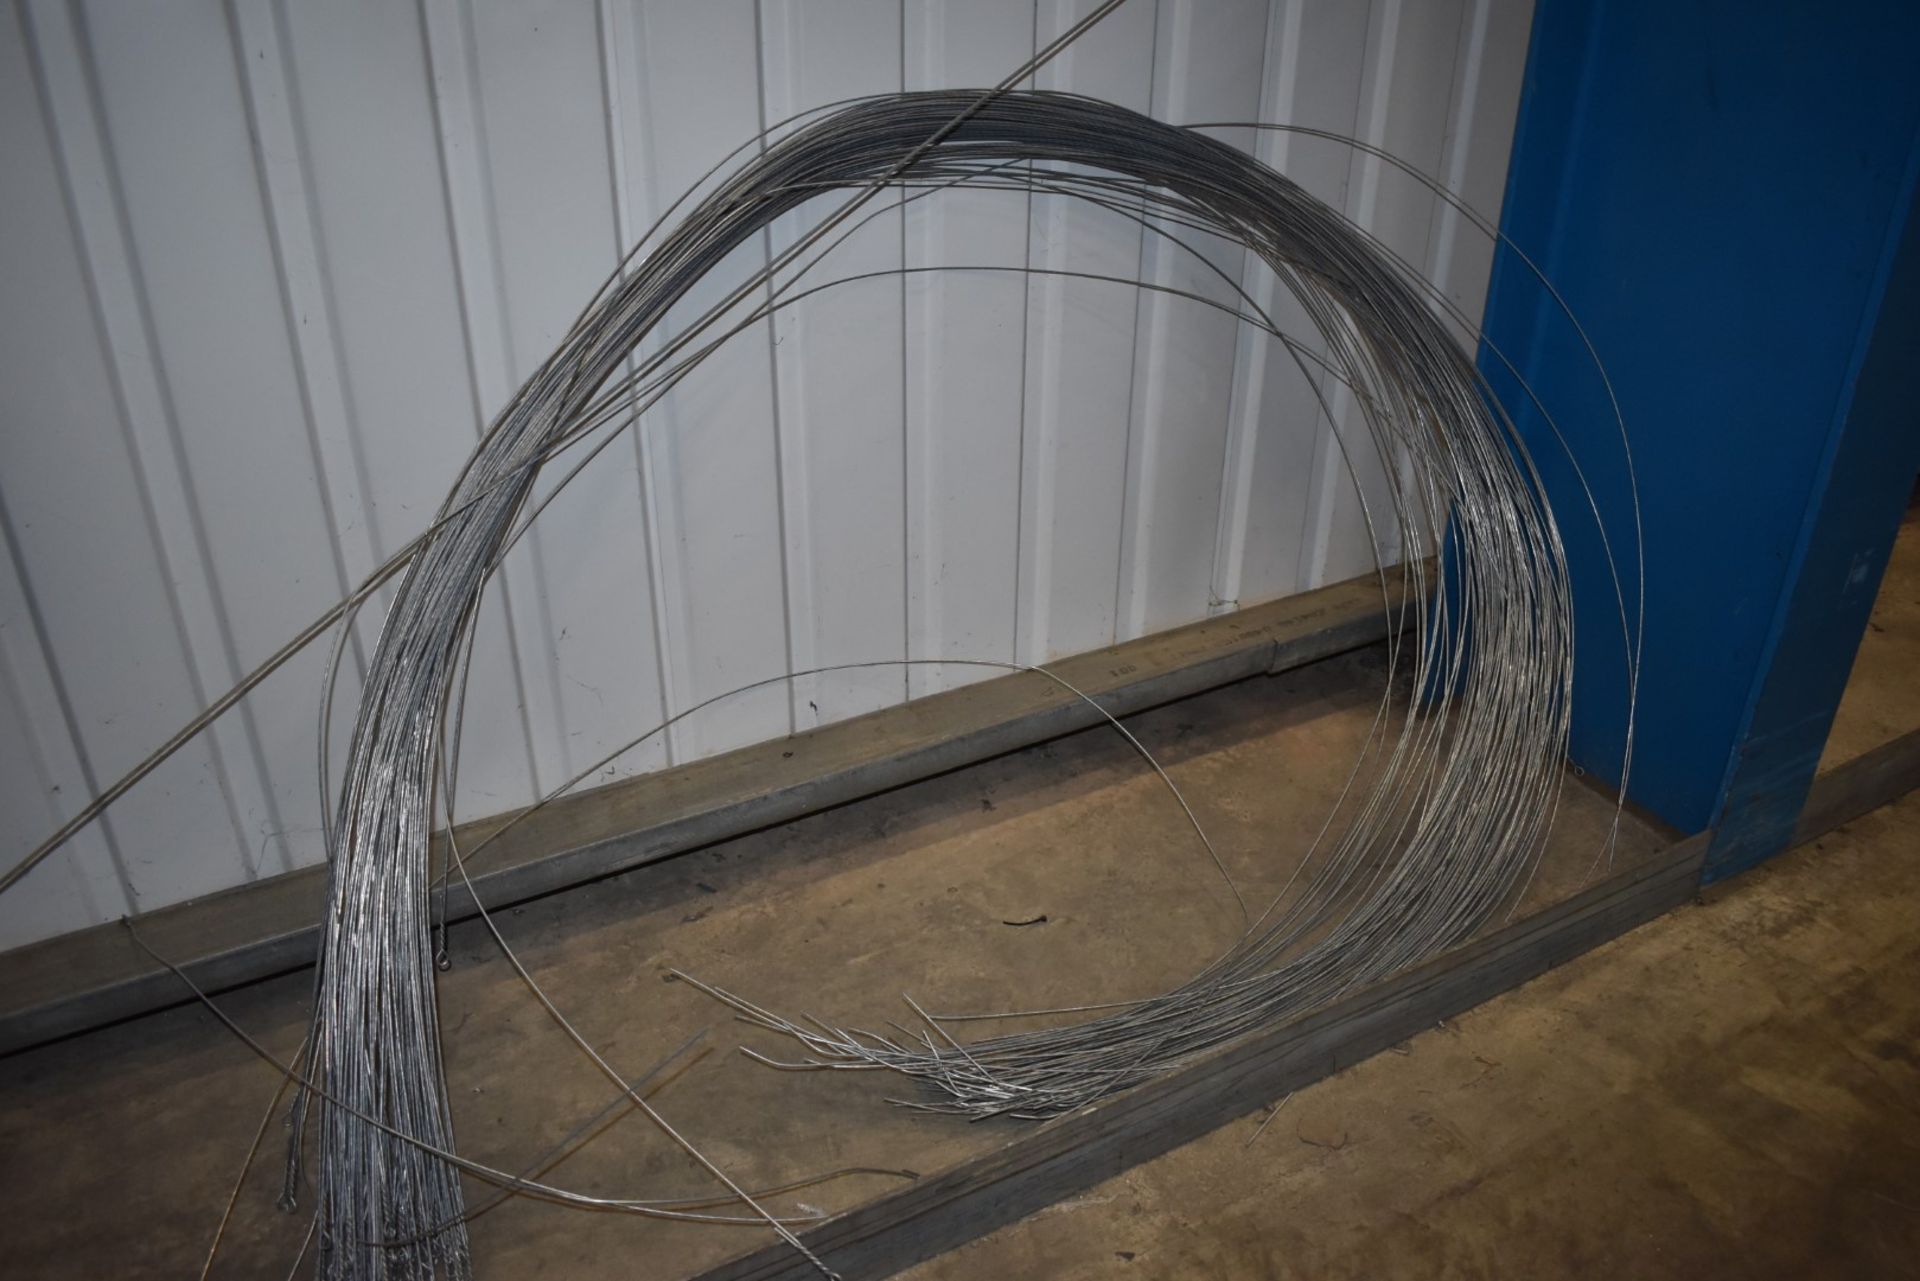 Bundle of Hooped End Metal Wire - CL480 - Location: Nottingham NG15 SHORT NOTICE SALE!This item must